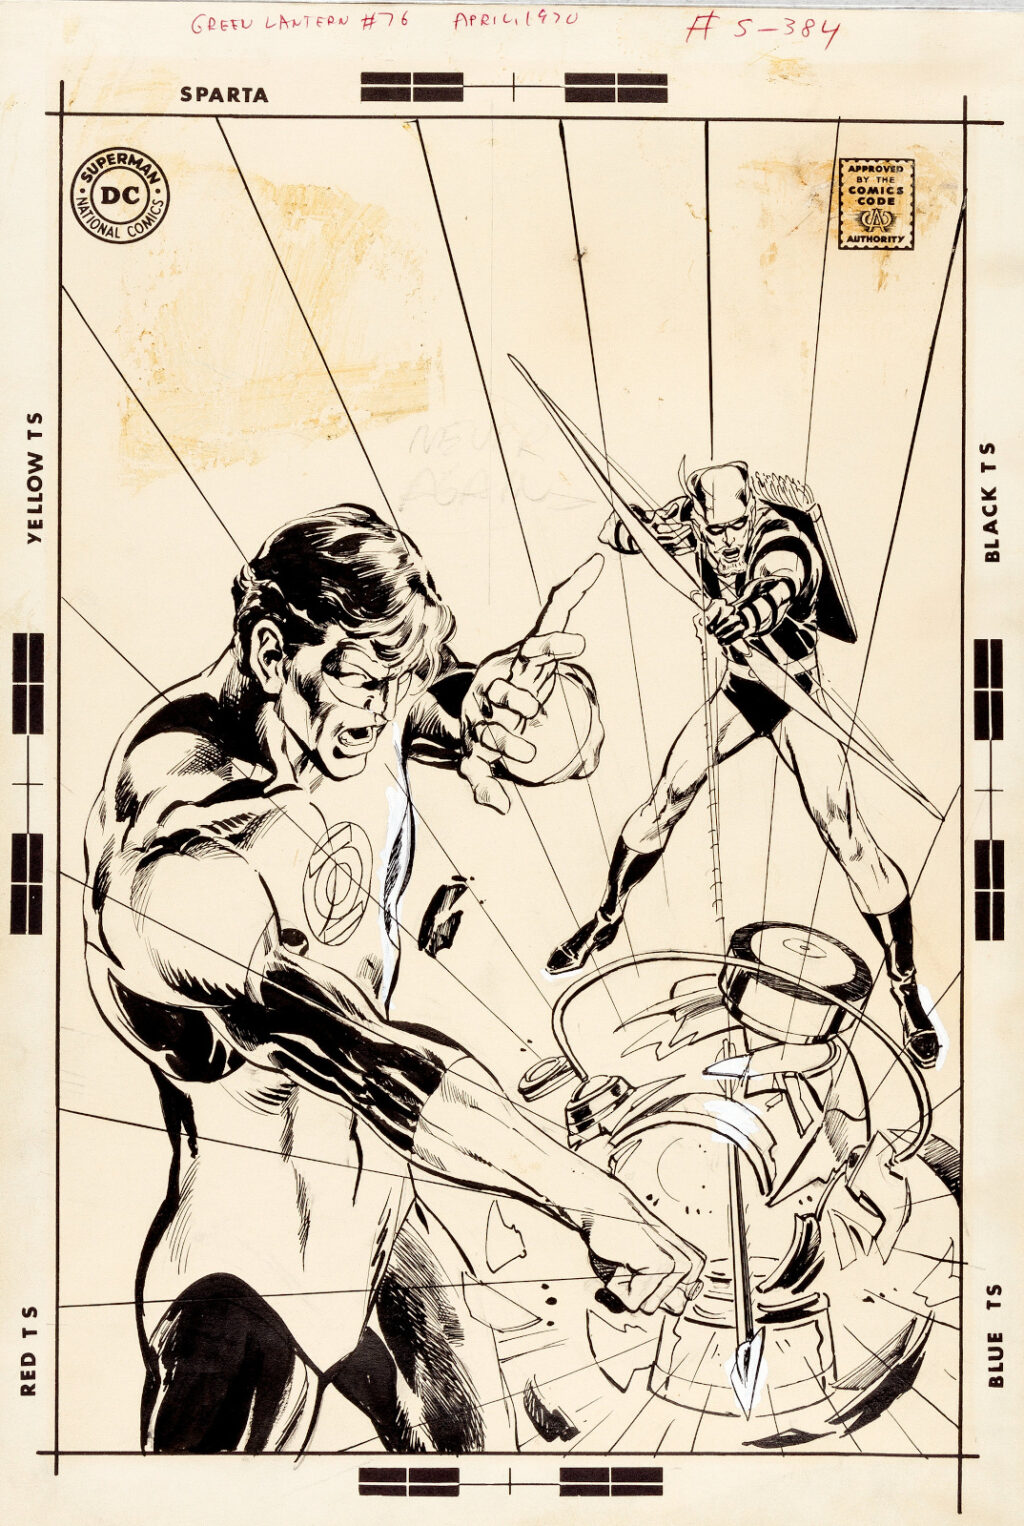 Green Lantern issue 76 cover by Neal Adams